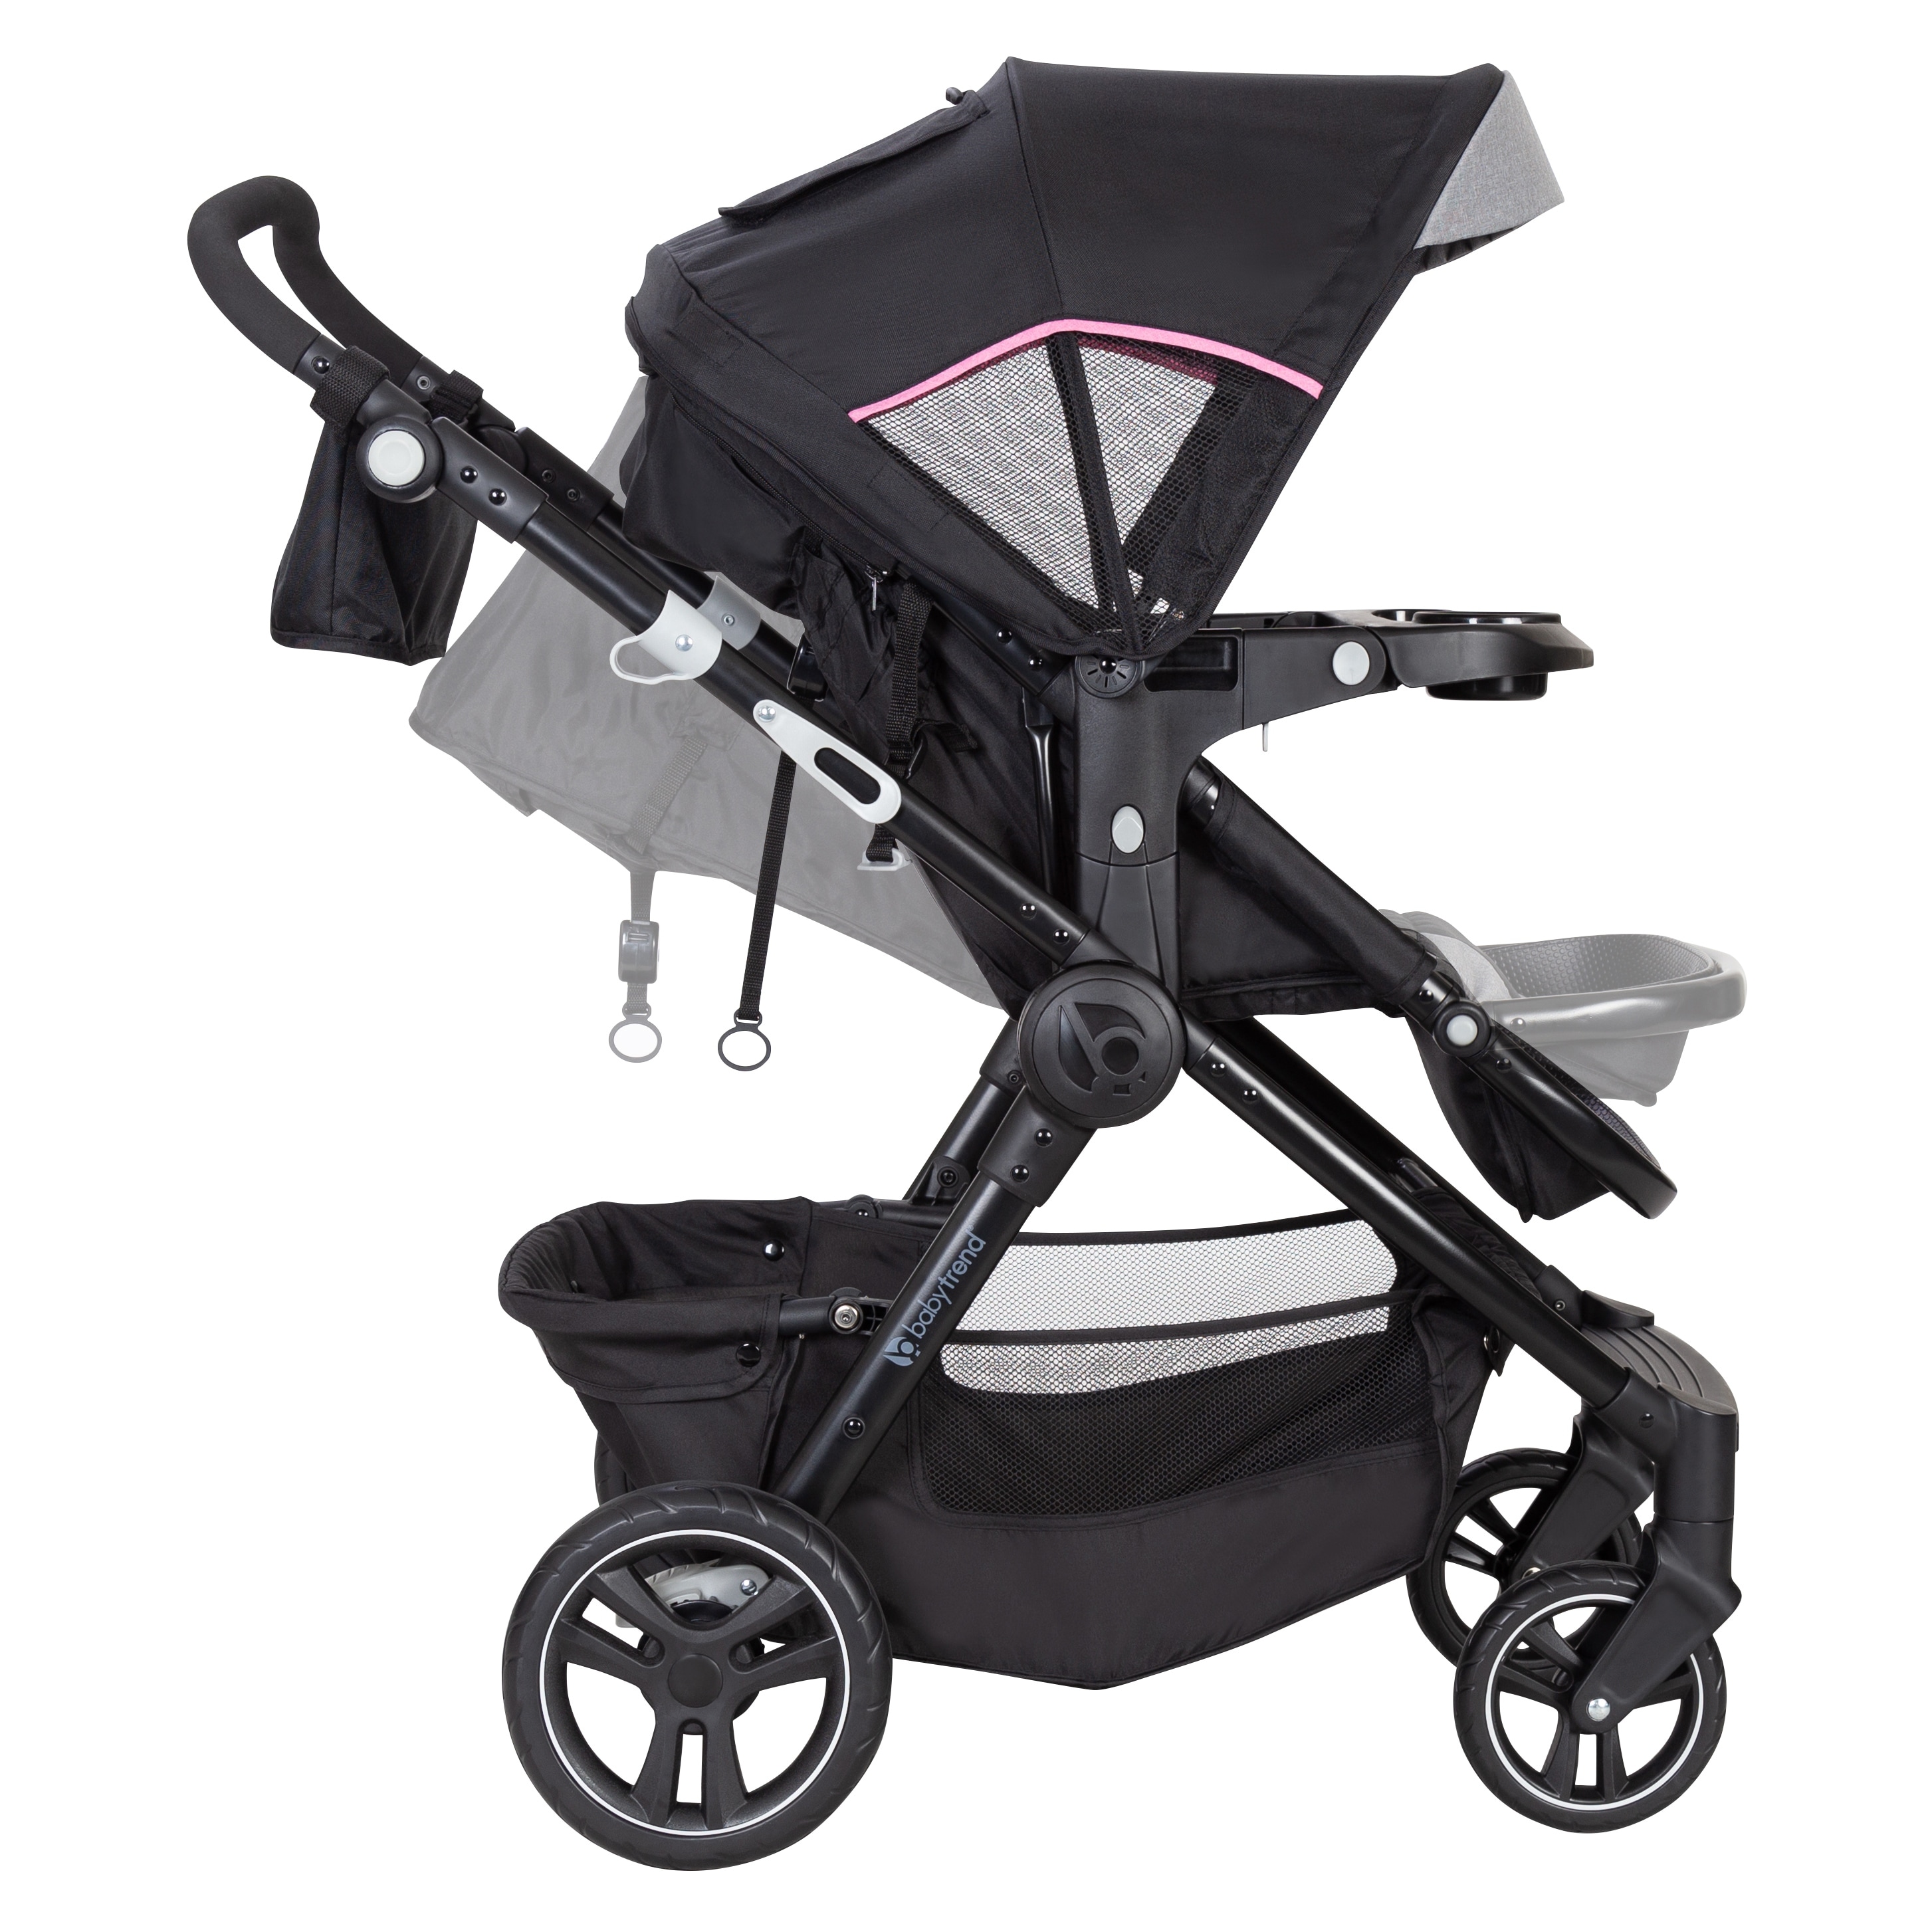 pink and black travel system